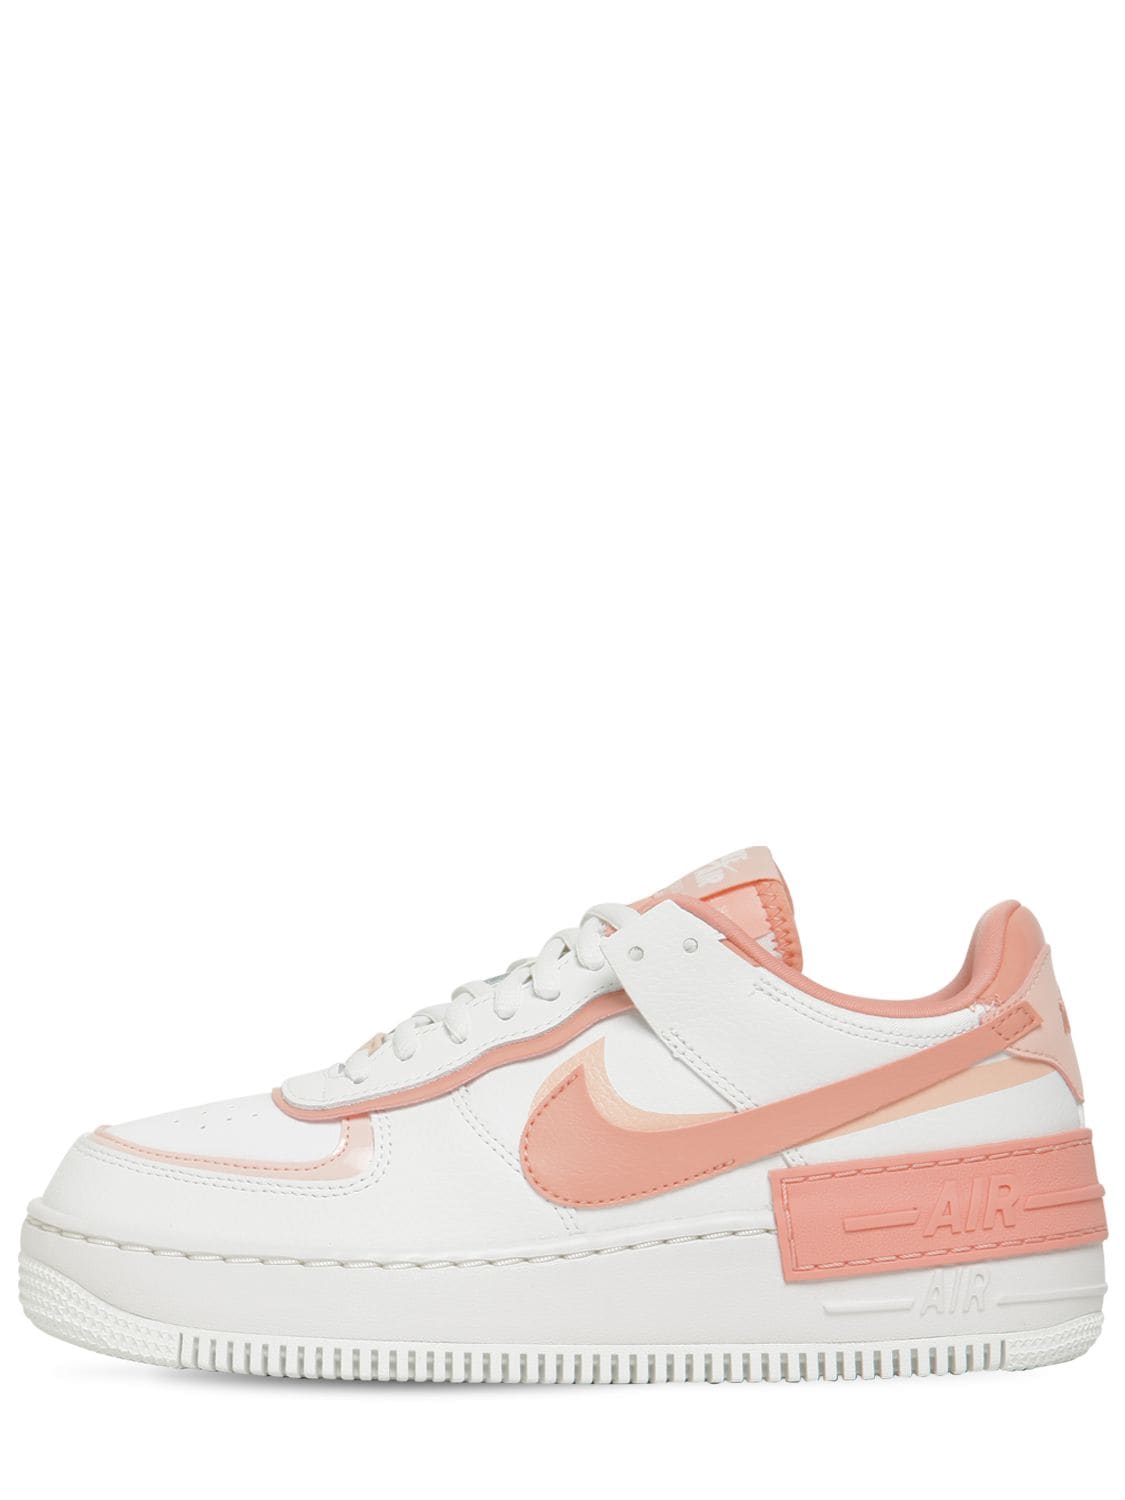 Nike Air Force 1 Shadow Sneakers In Washed Coral